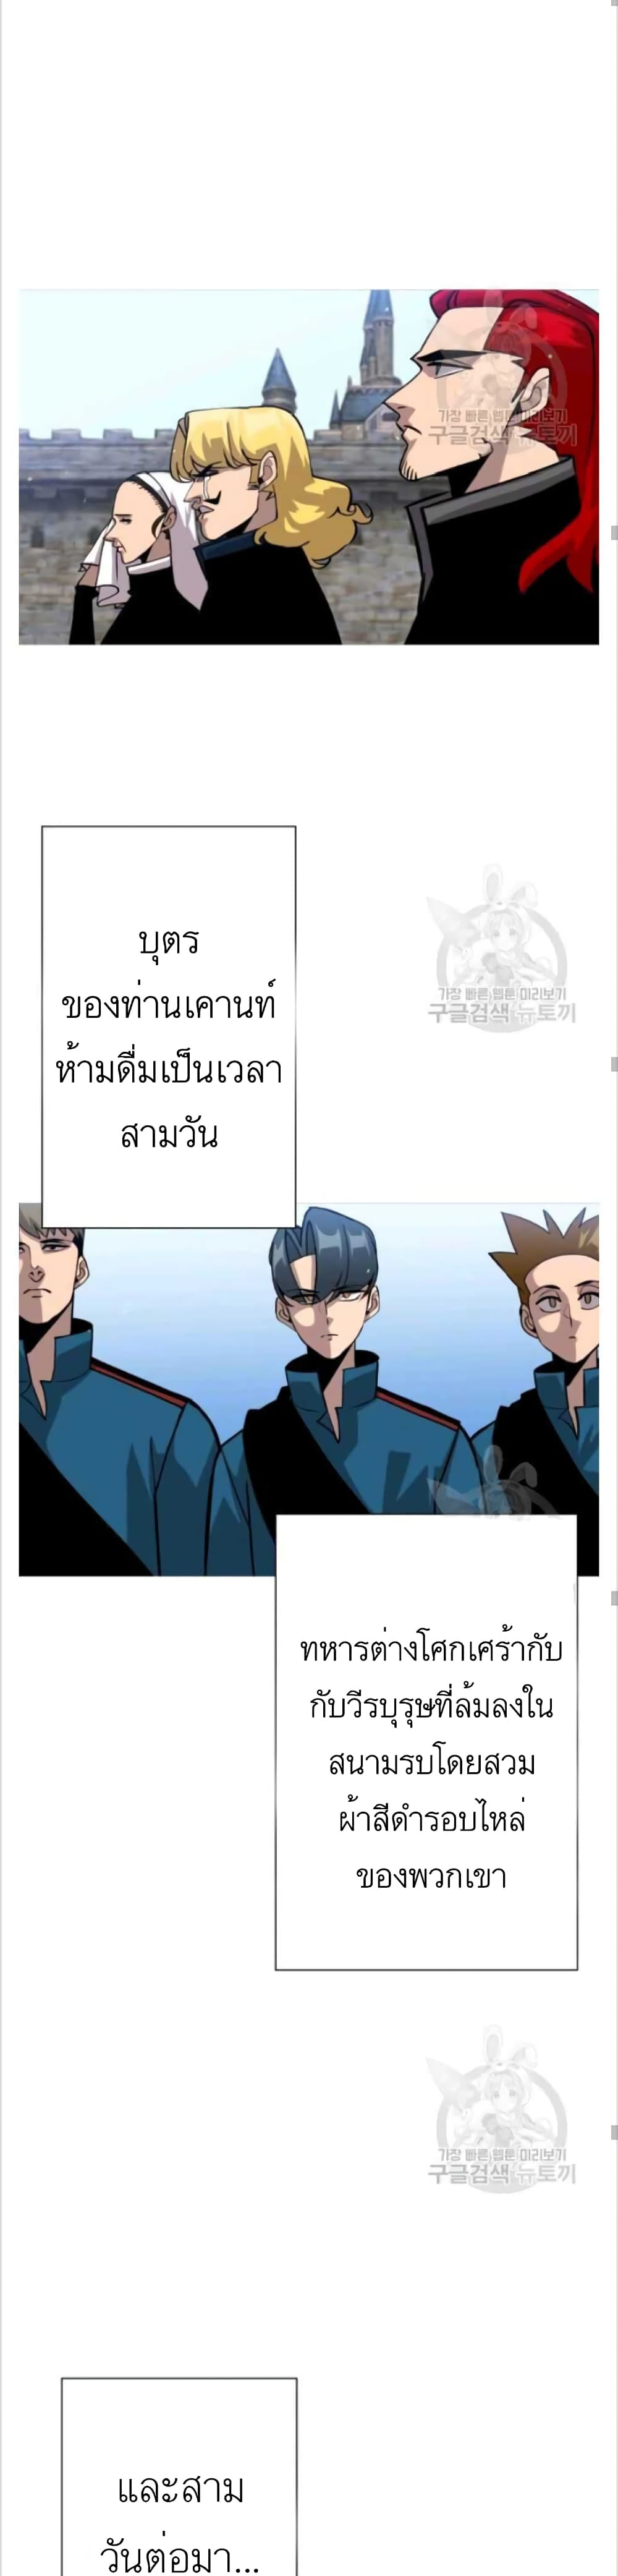 The Story of a Low Rank Soldier Becoming a Monarch ตอนที่ 50 (19)